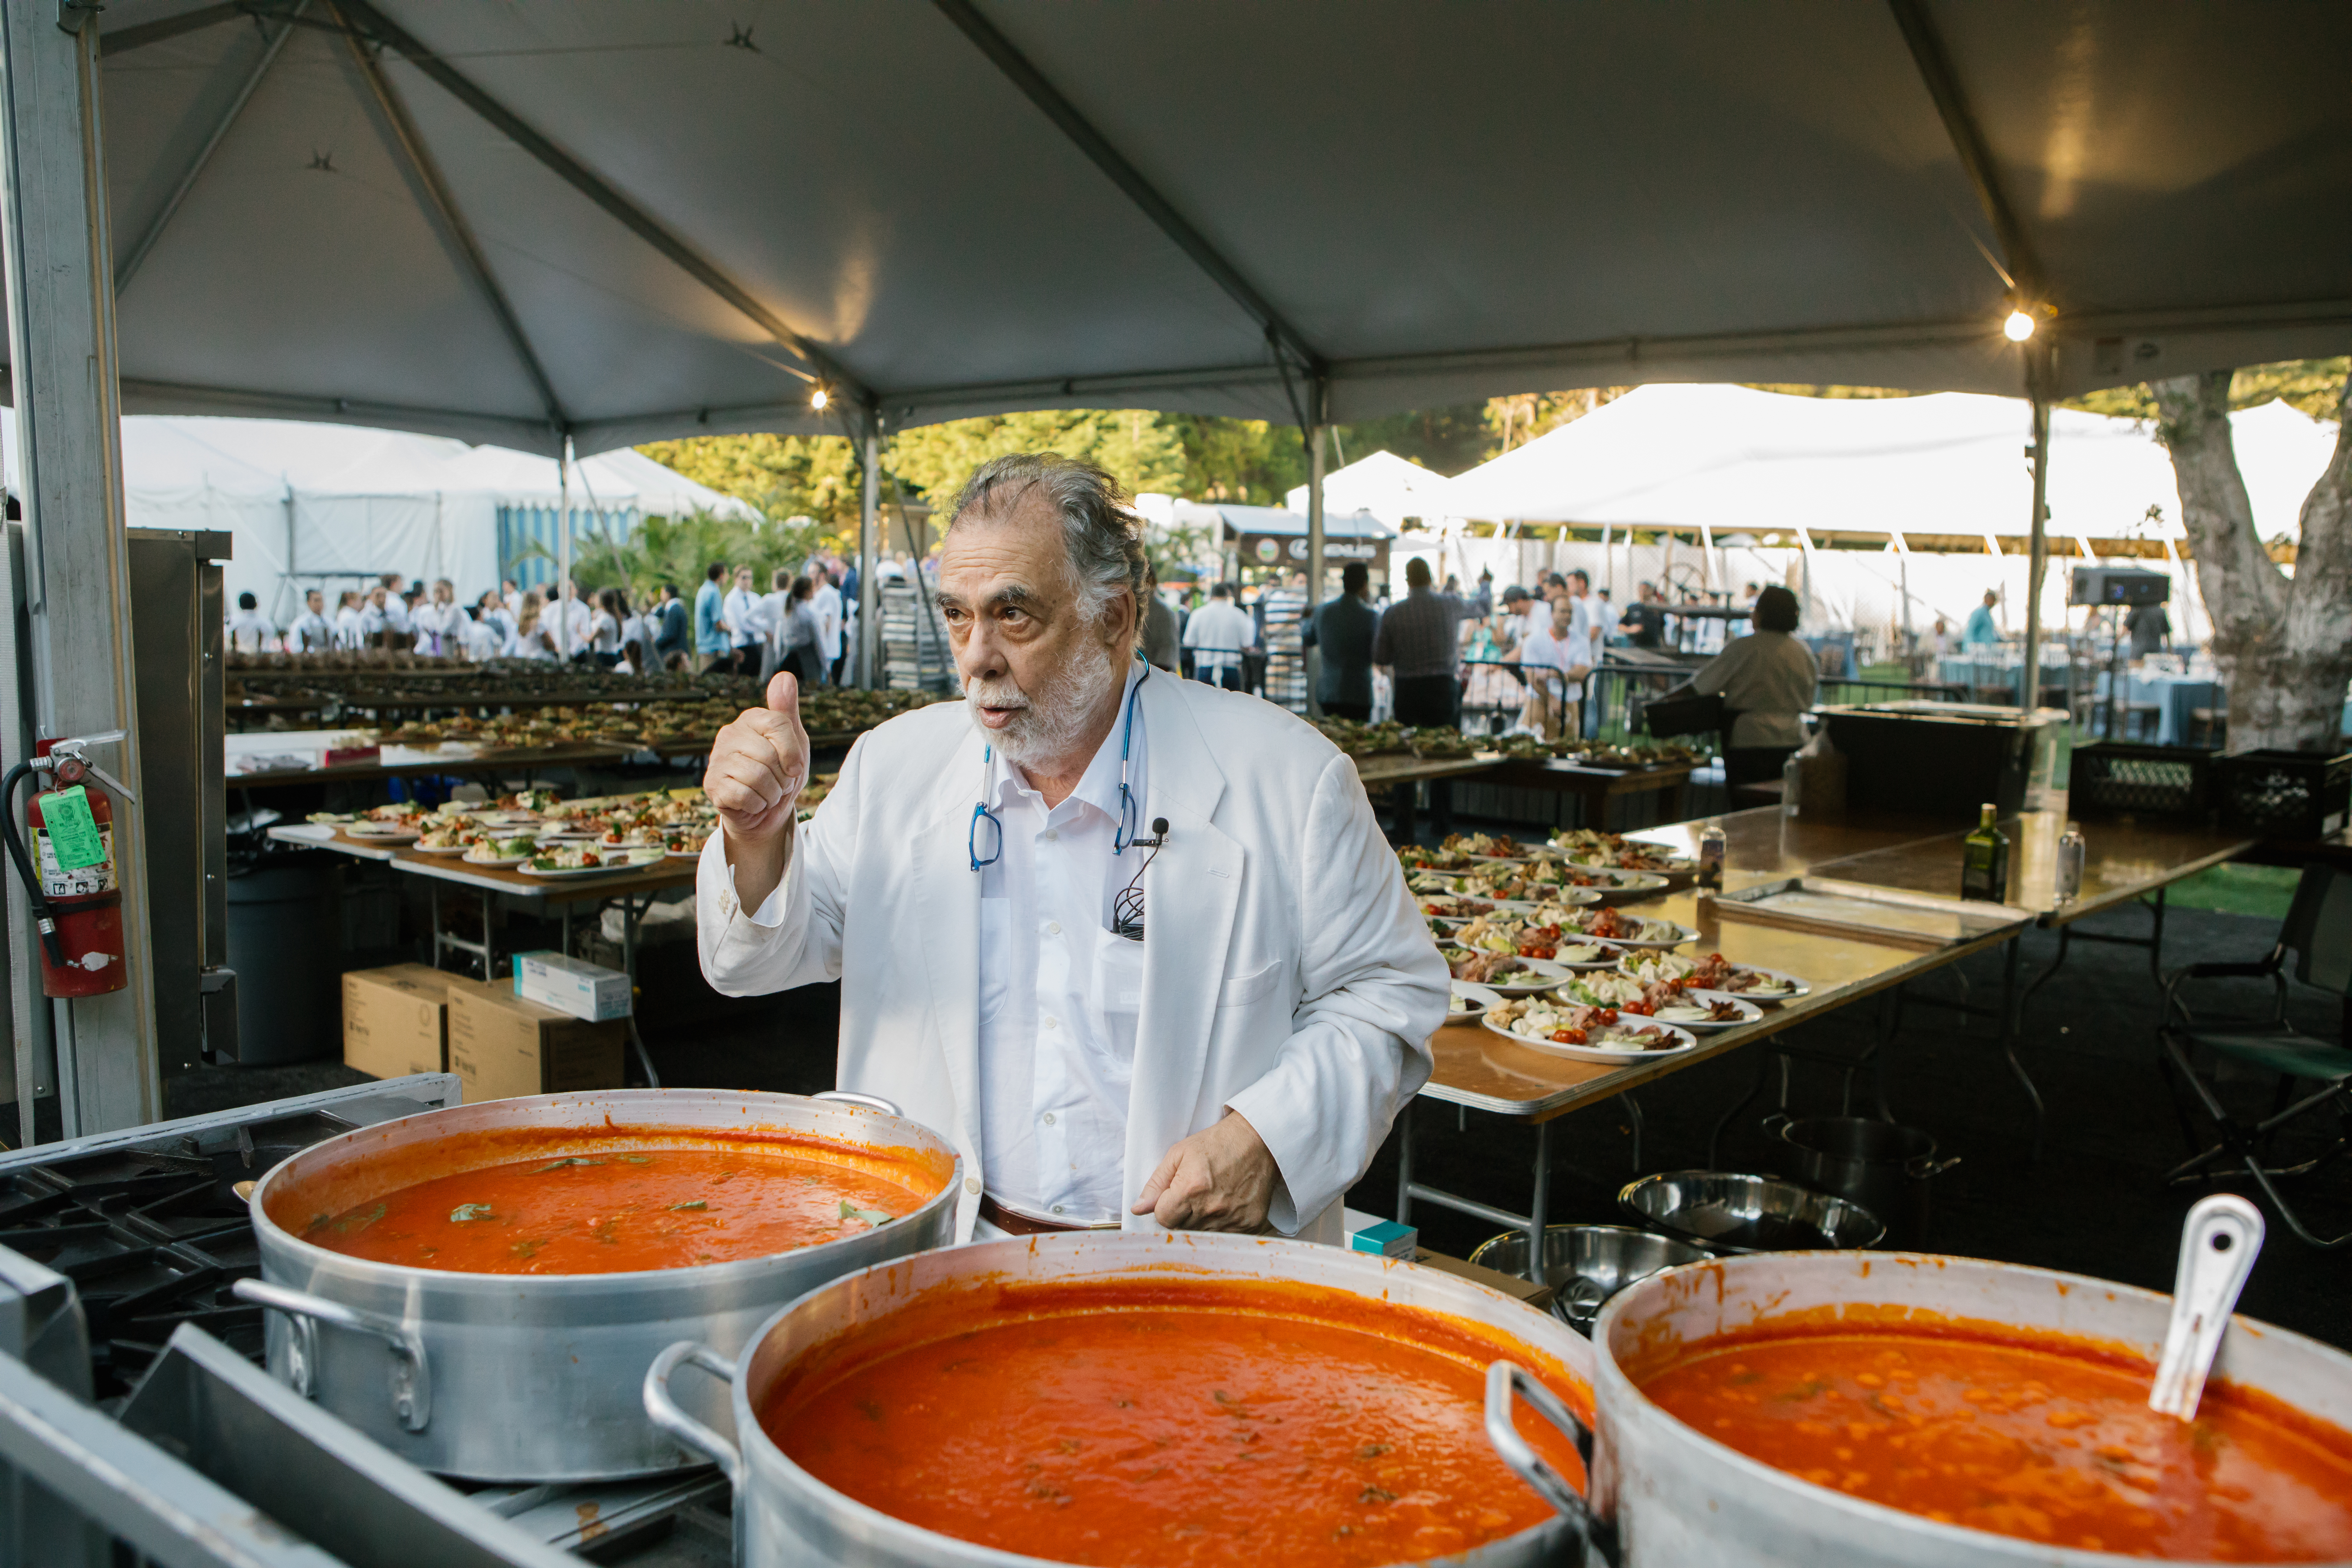 Man stands behind big silver bowls of tomato sauce